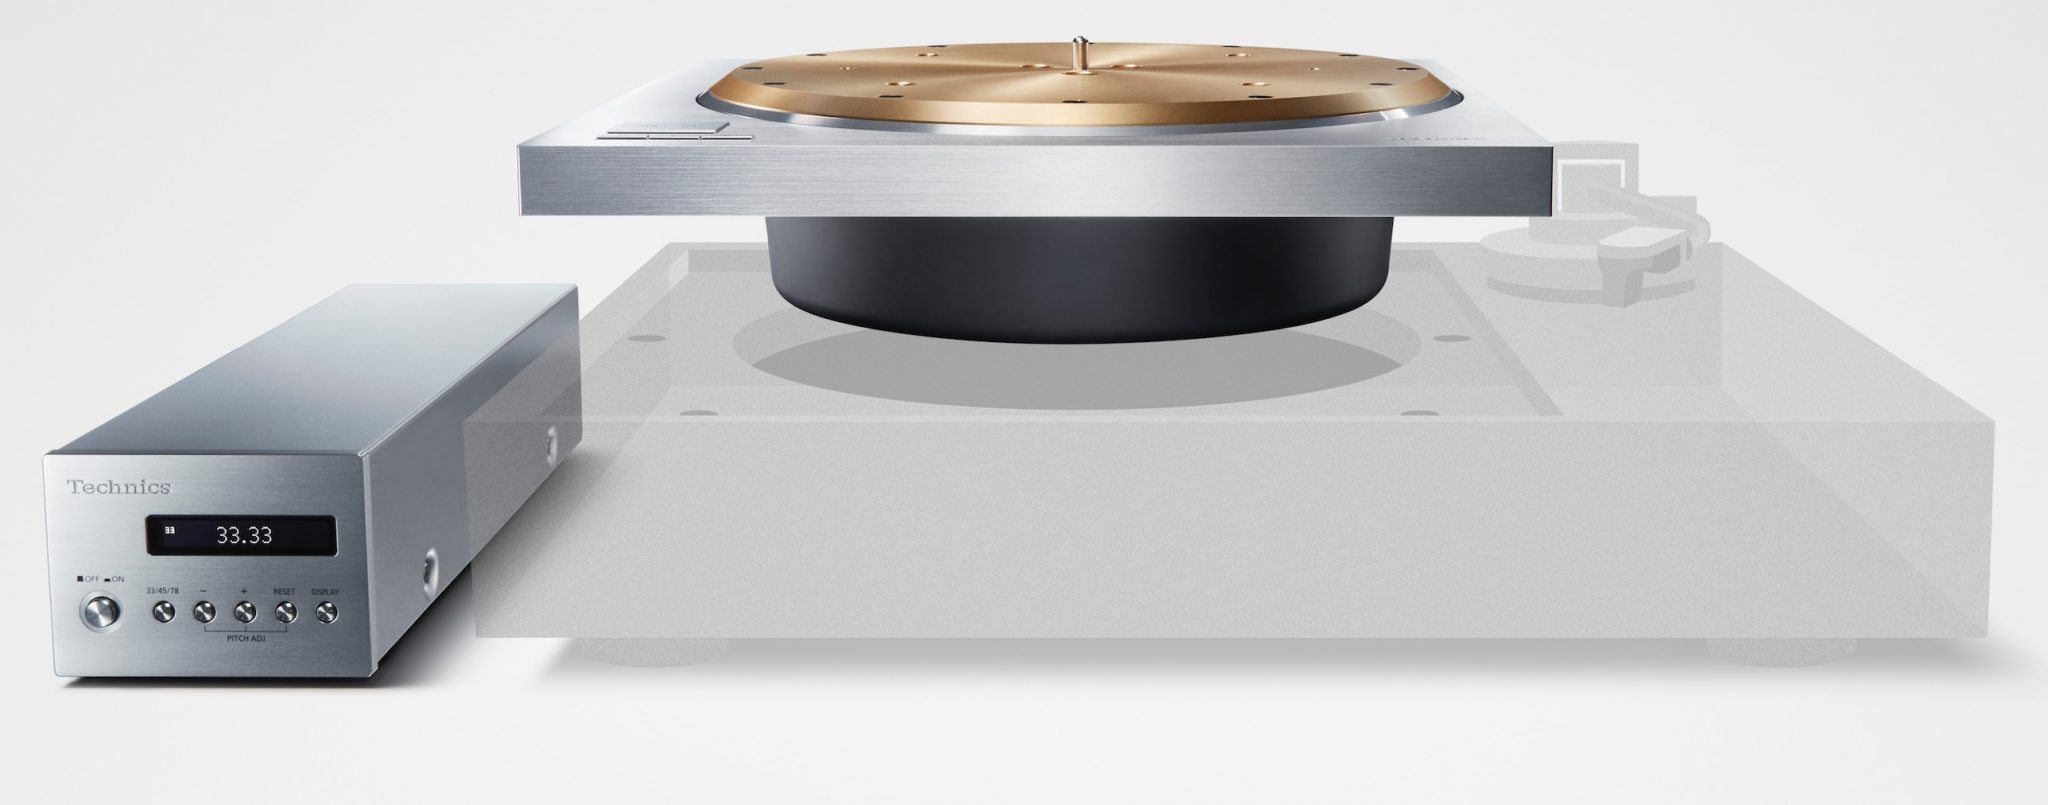 Technics SP-10R and SL-1000R Direct Drive Turntables